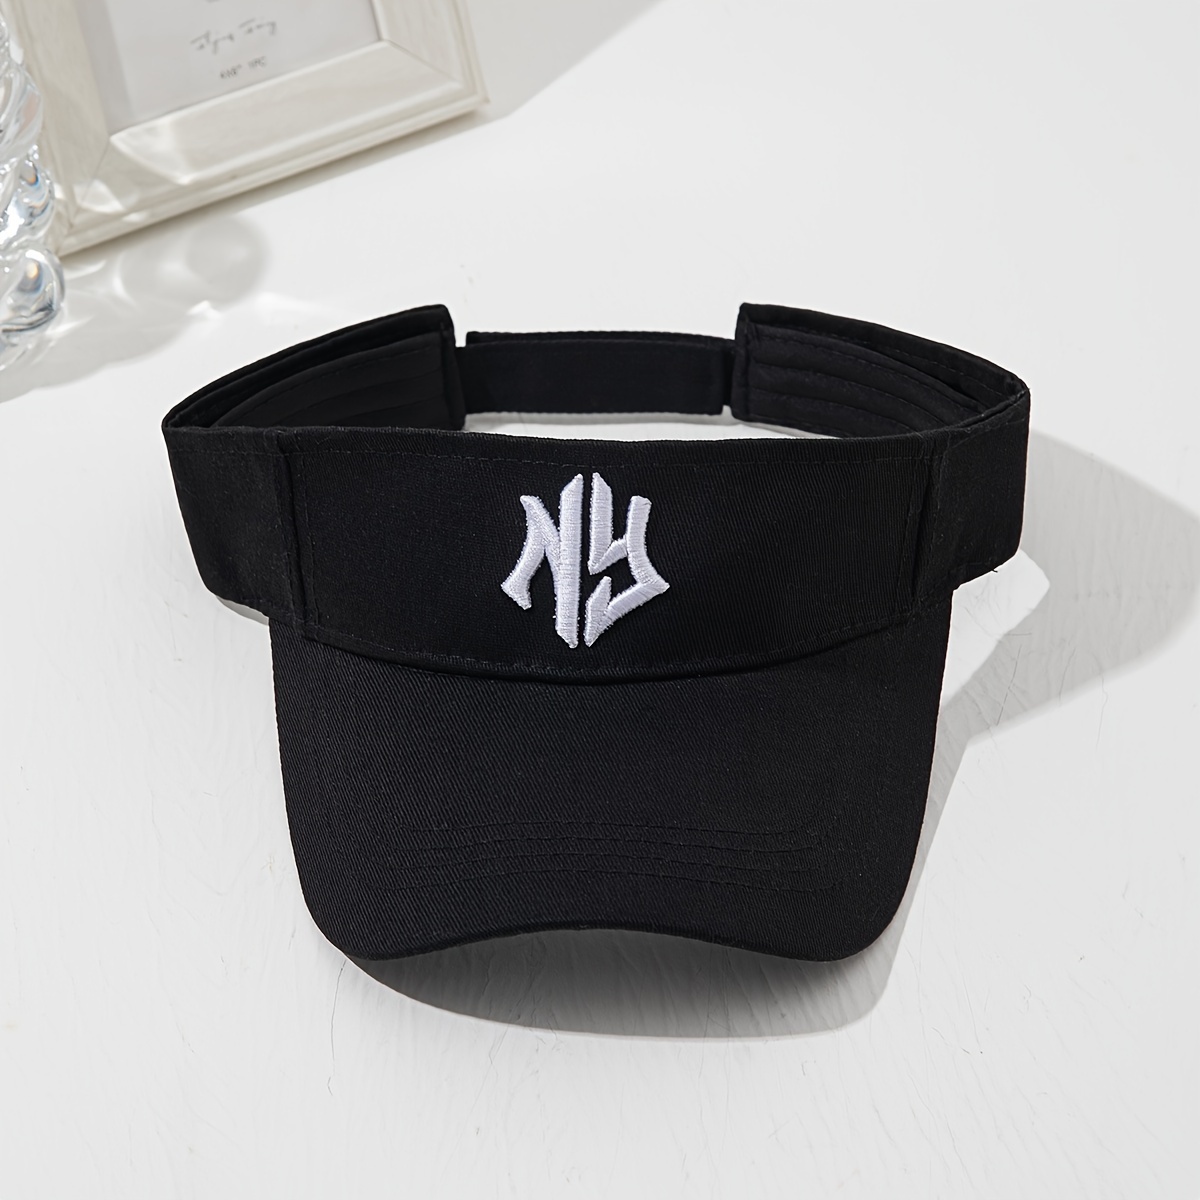 

Men's Embroidered Ny 3d Letter Open Top Visor Hat Funky Style 100% Cotton Material Adjustable Sun Cap For Daily Wear Spring Summer